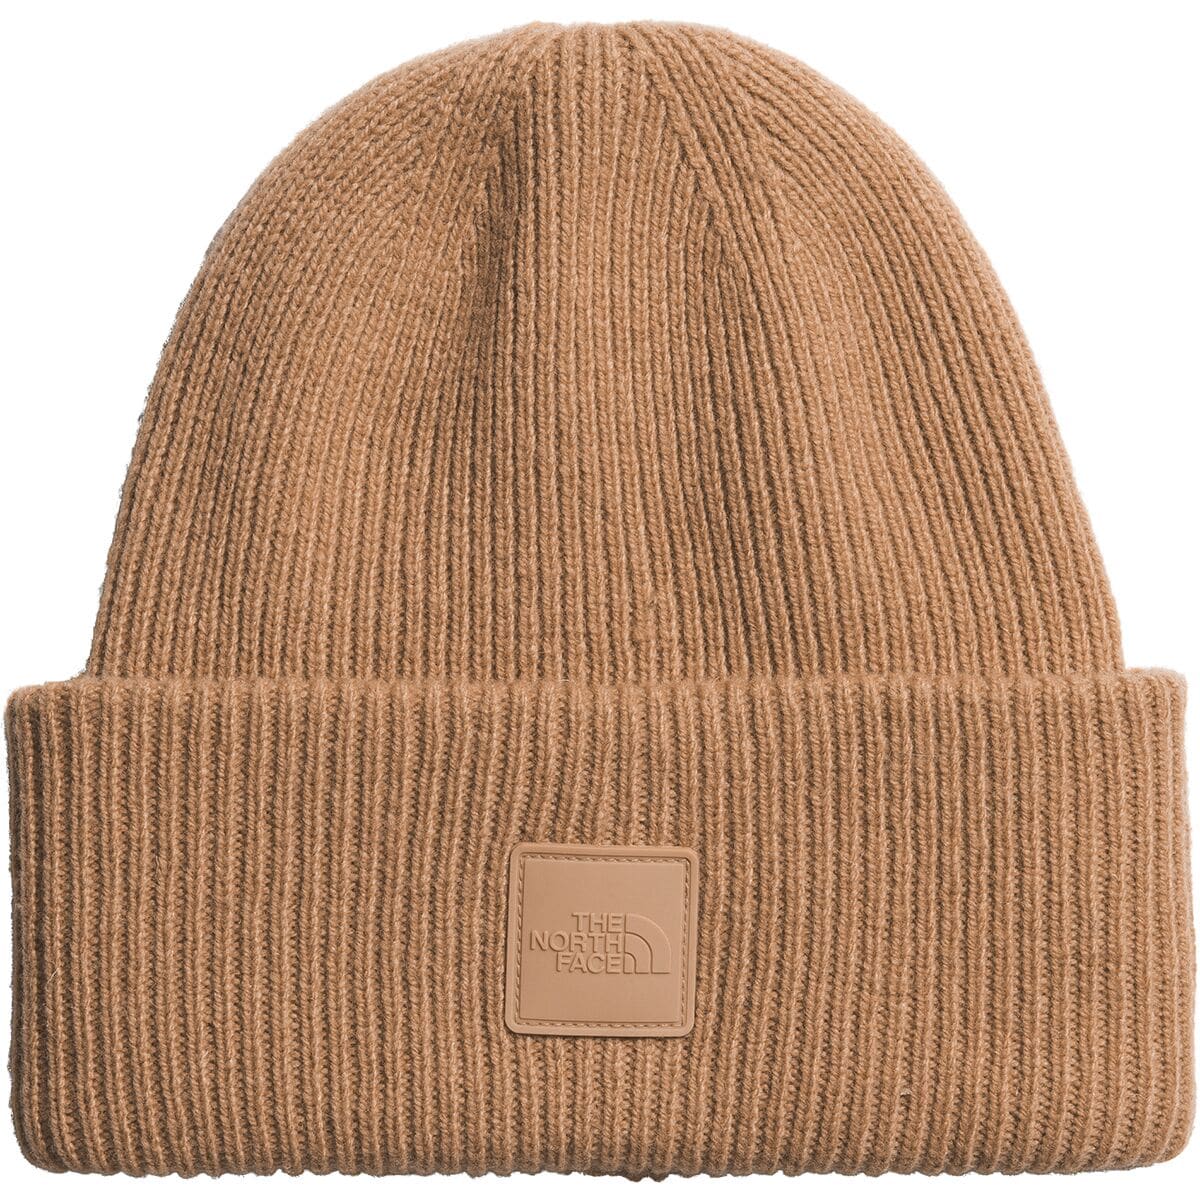 The North Face Urban Patch Beanie - Accessories